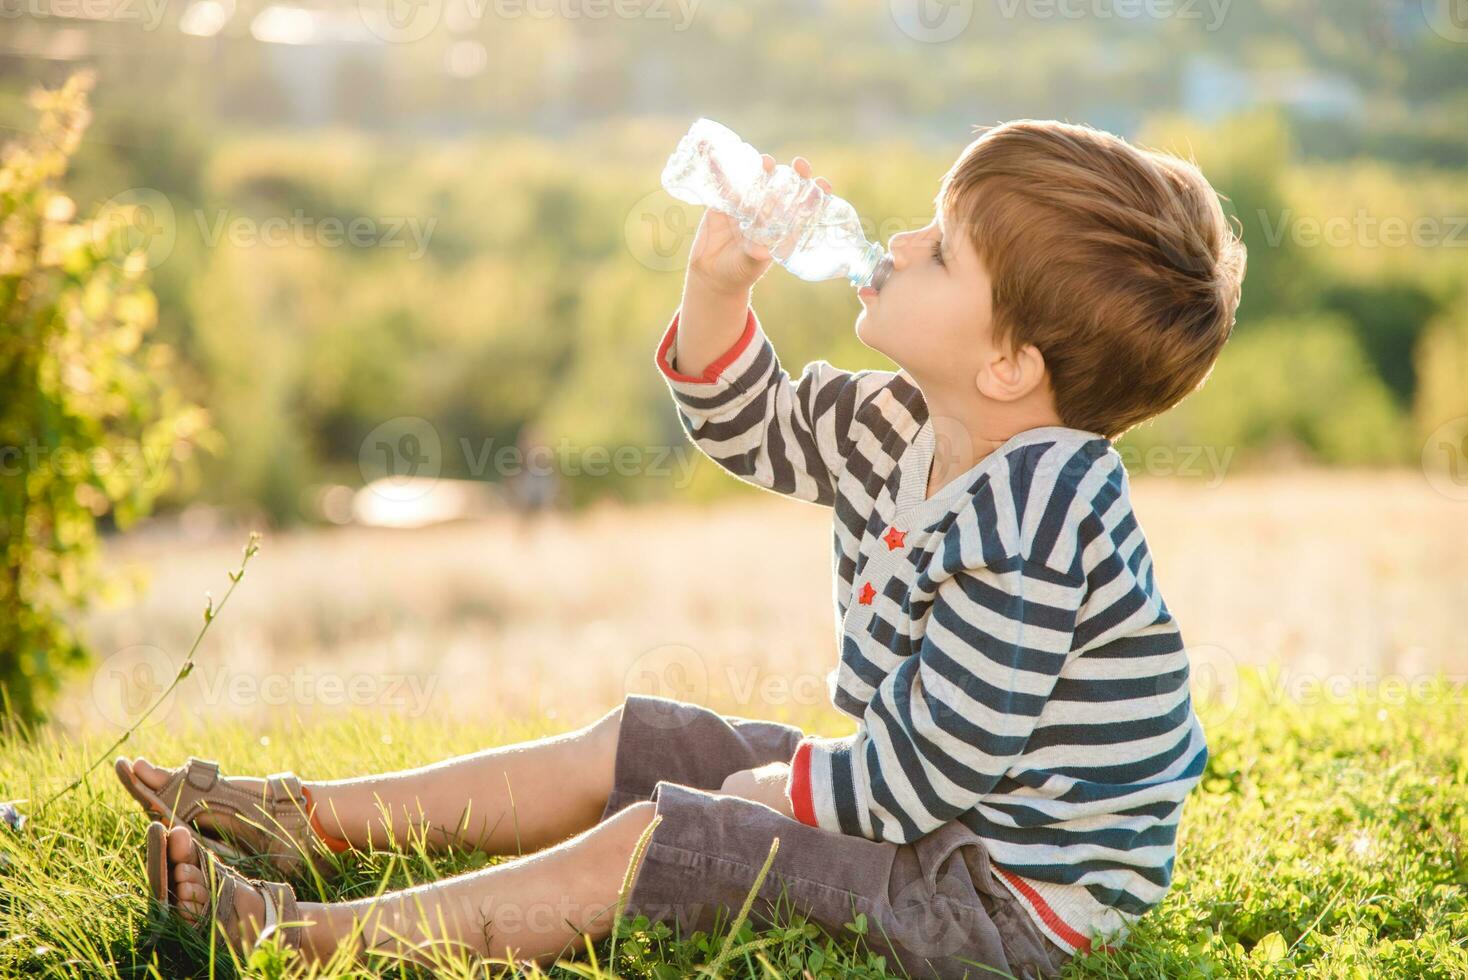 A beautiful child sitting on the grass drinks water from a bottle in the summer at sunset. Boy quenches his thirst on a hot day photo